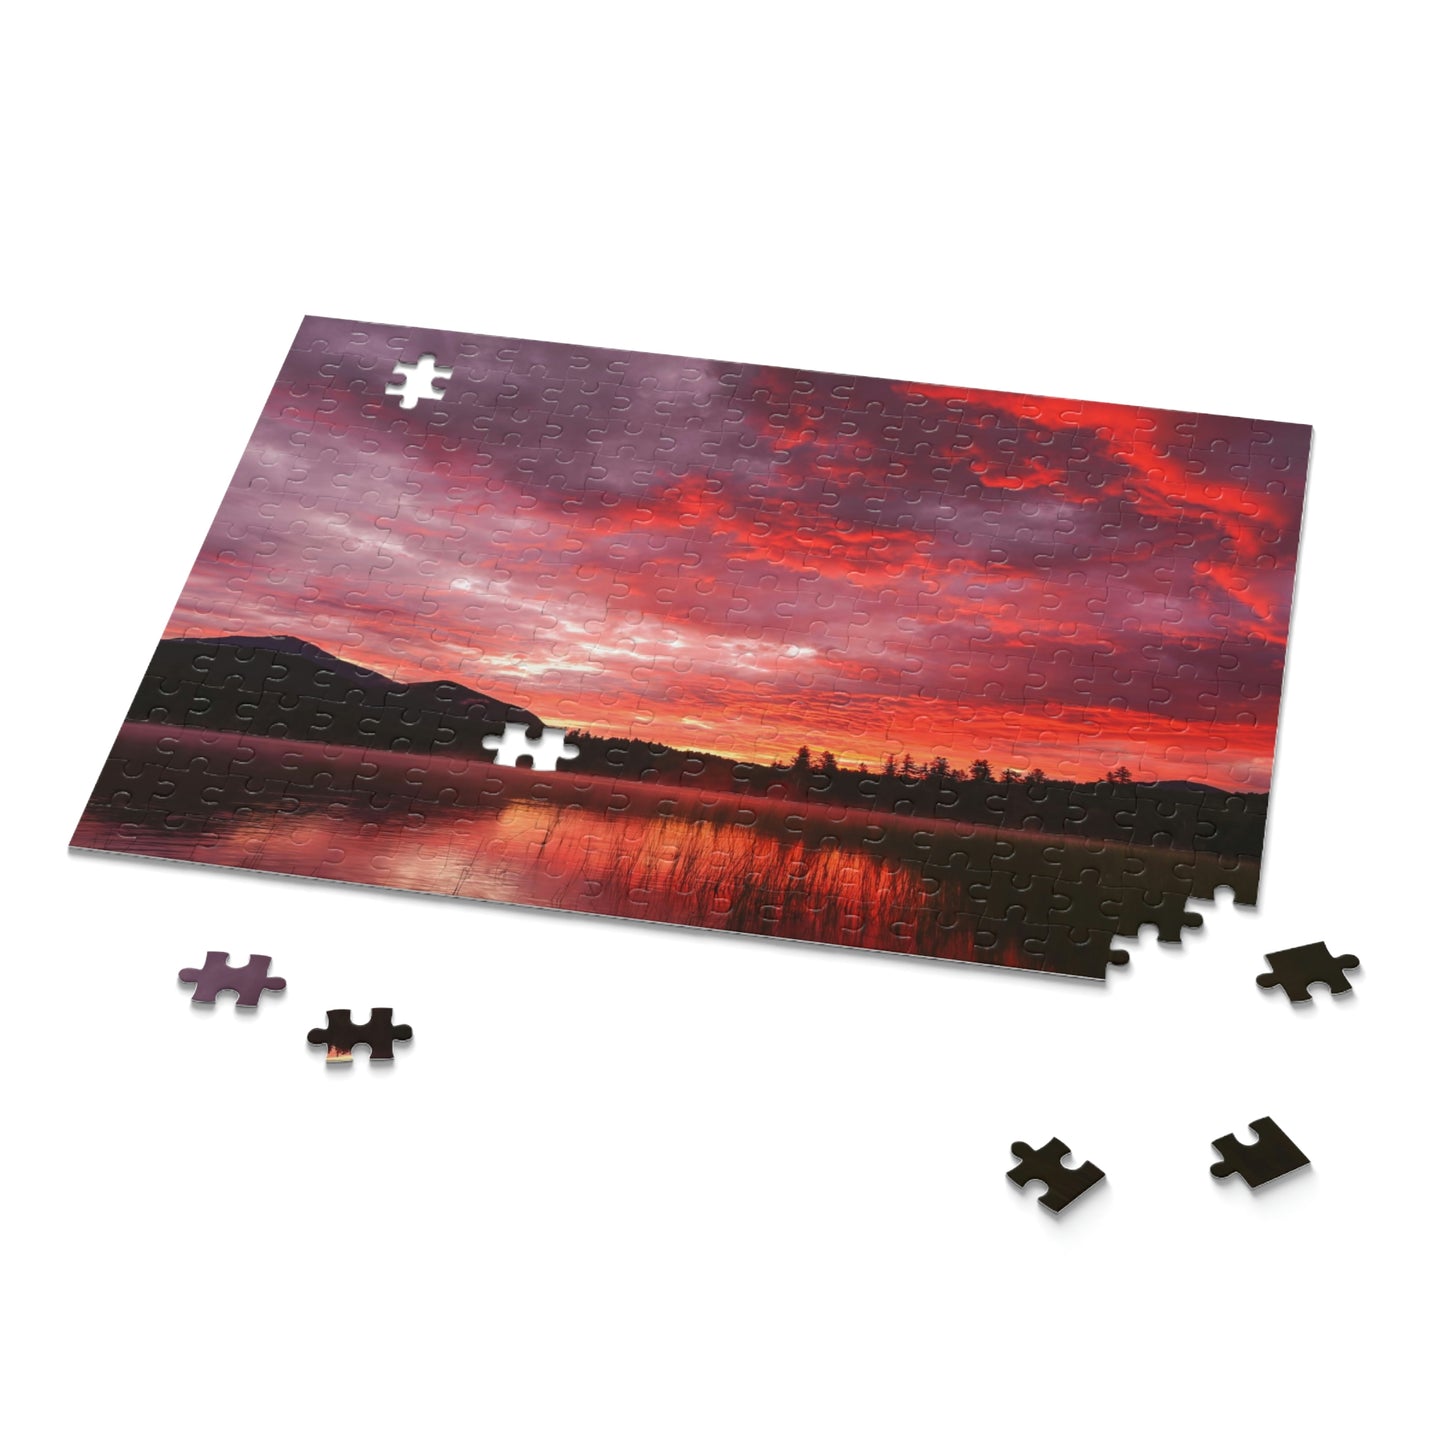 Puzzle - Fire in the Sky, Connery Pond